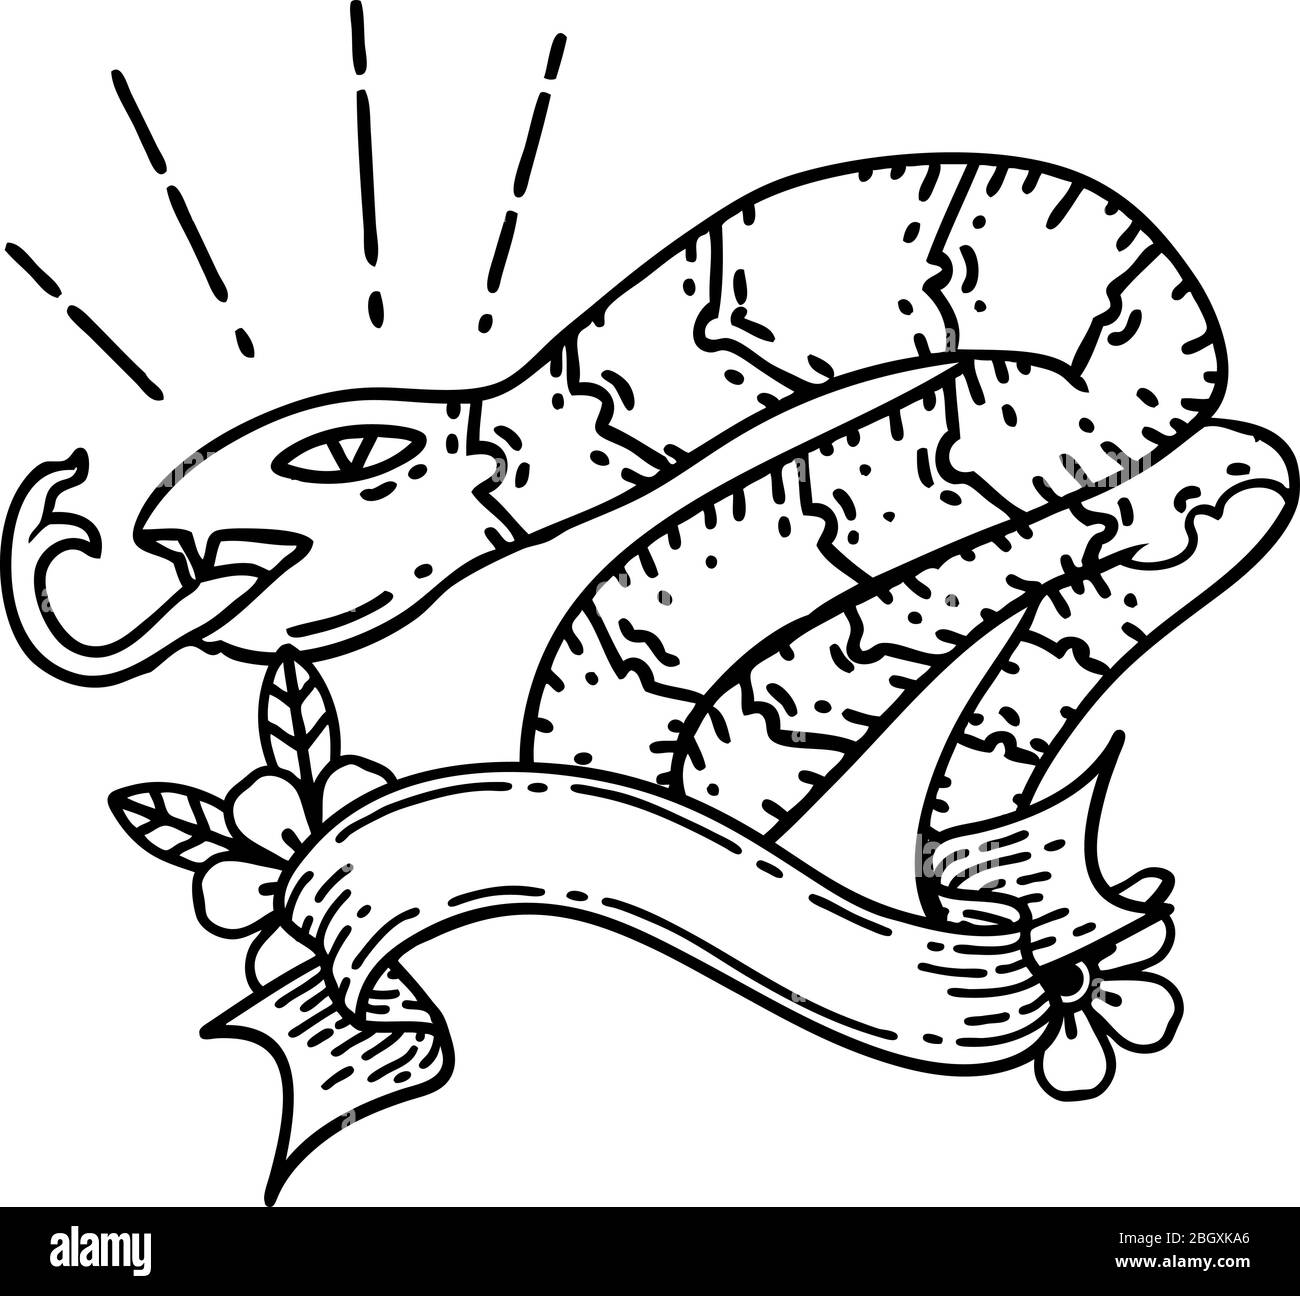 scroll banner with black line work tattoo style hissing snake Stock Vector